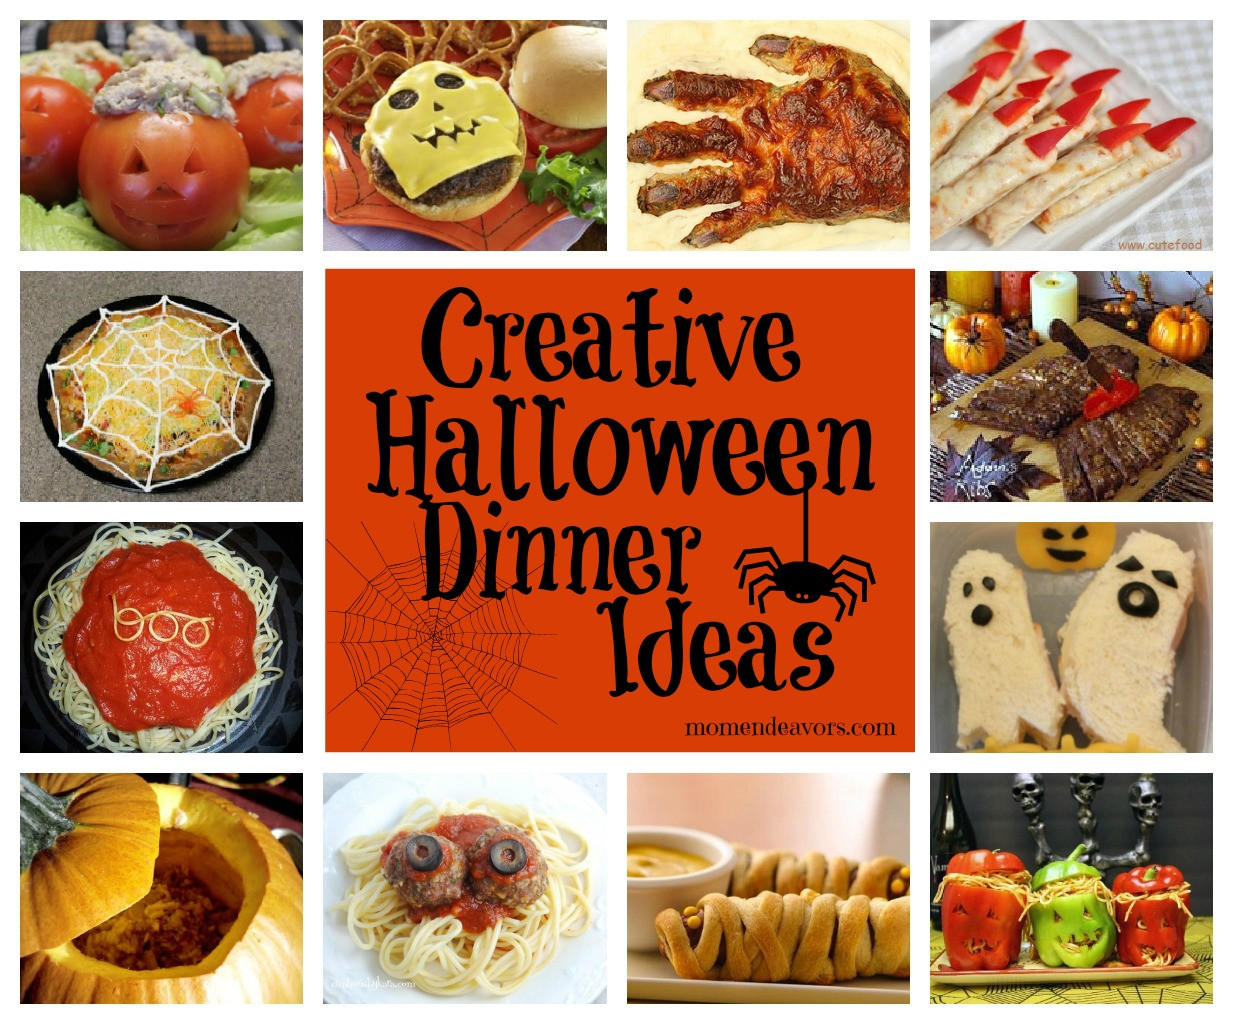 Halloween Dinner Recipes With Pictures
 15 Creative Halloween Dinner Ideas